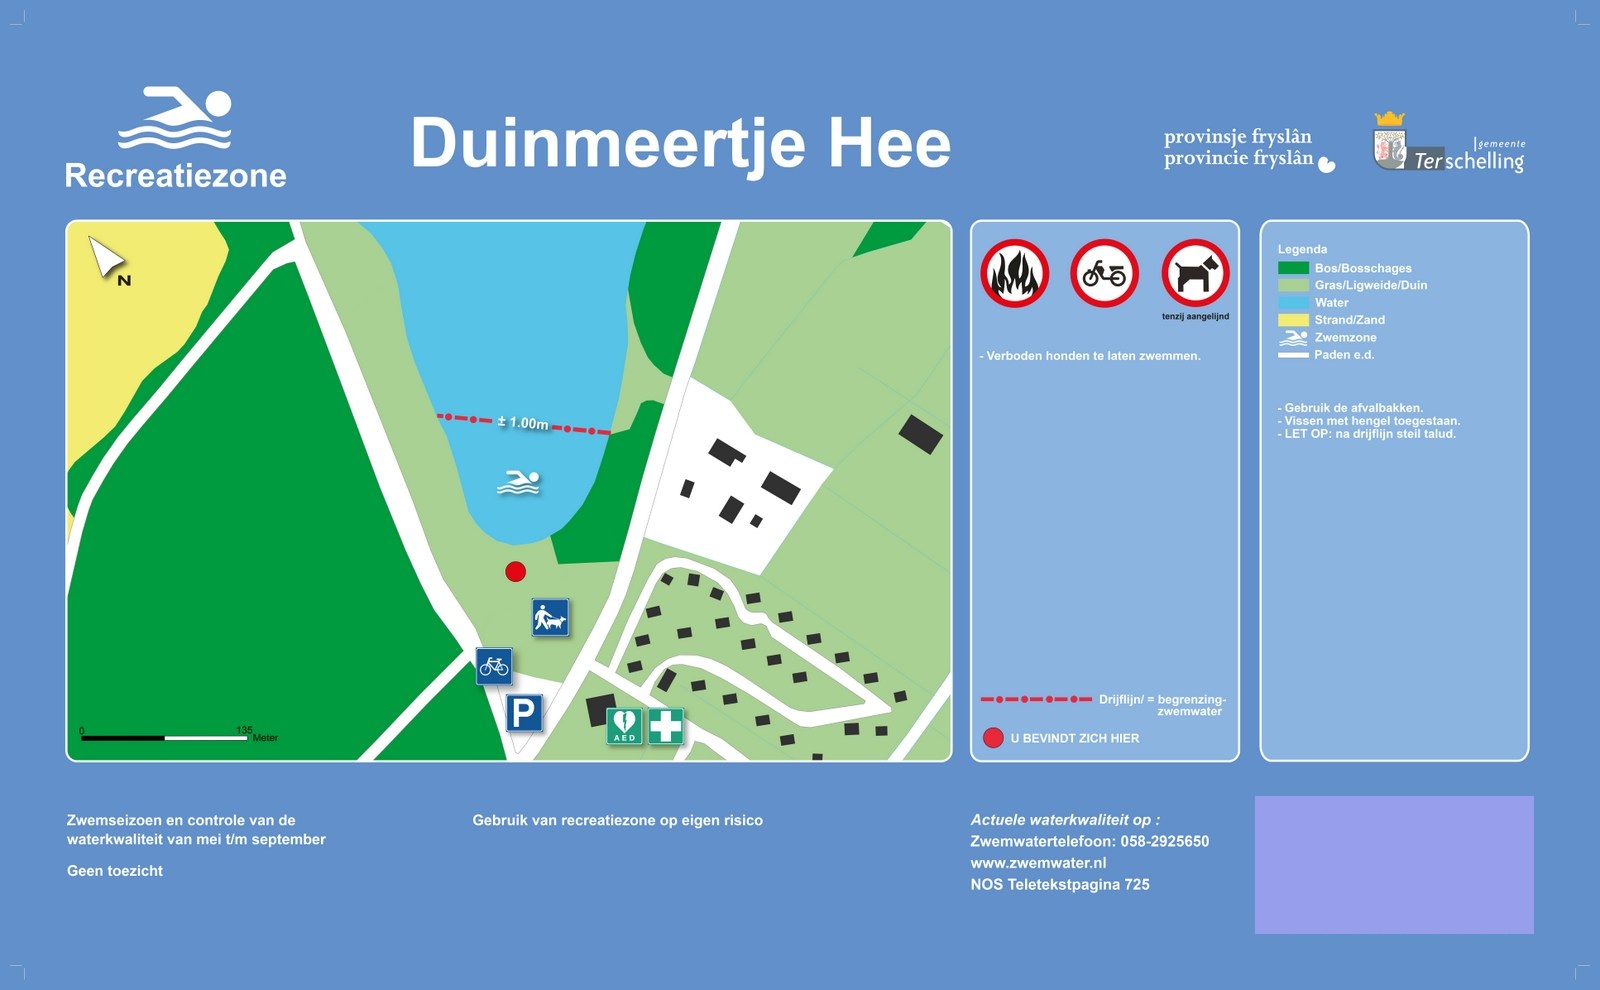 The information board at the swimming location Duinmeertje Hee